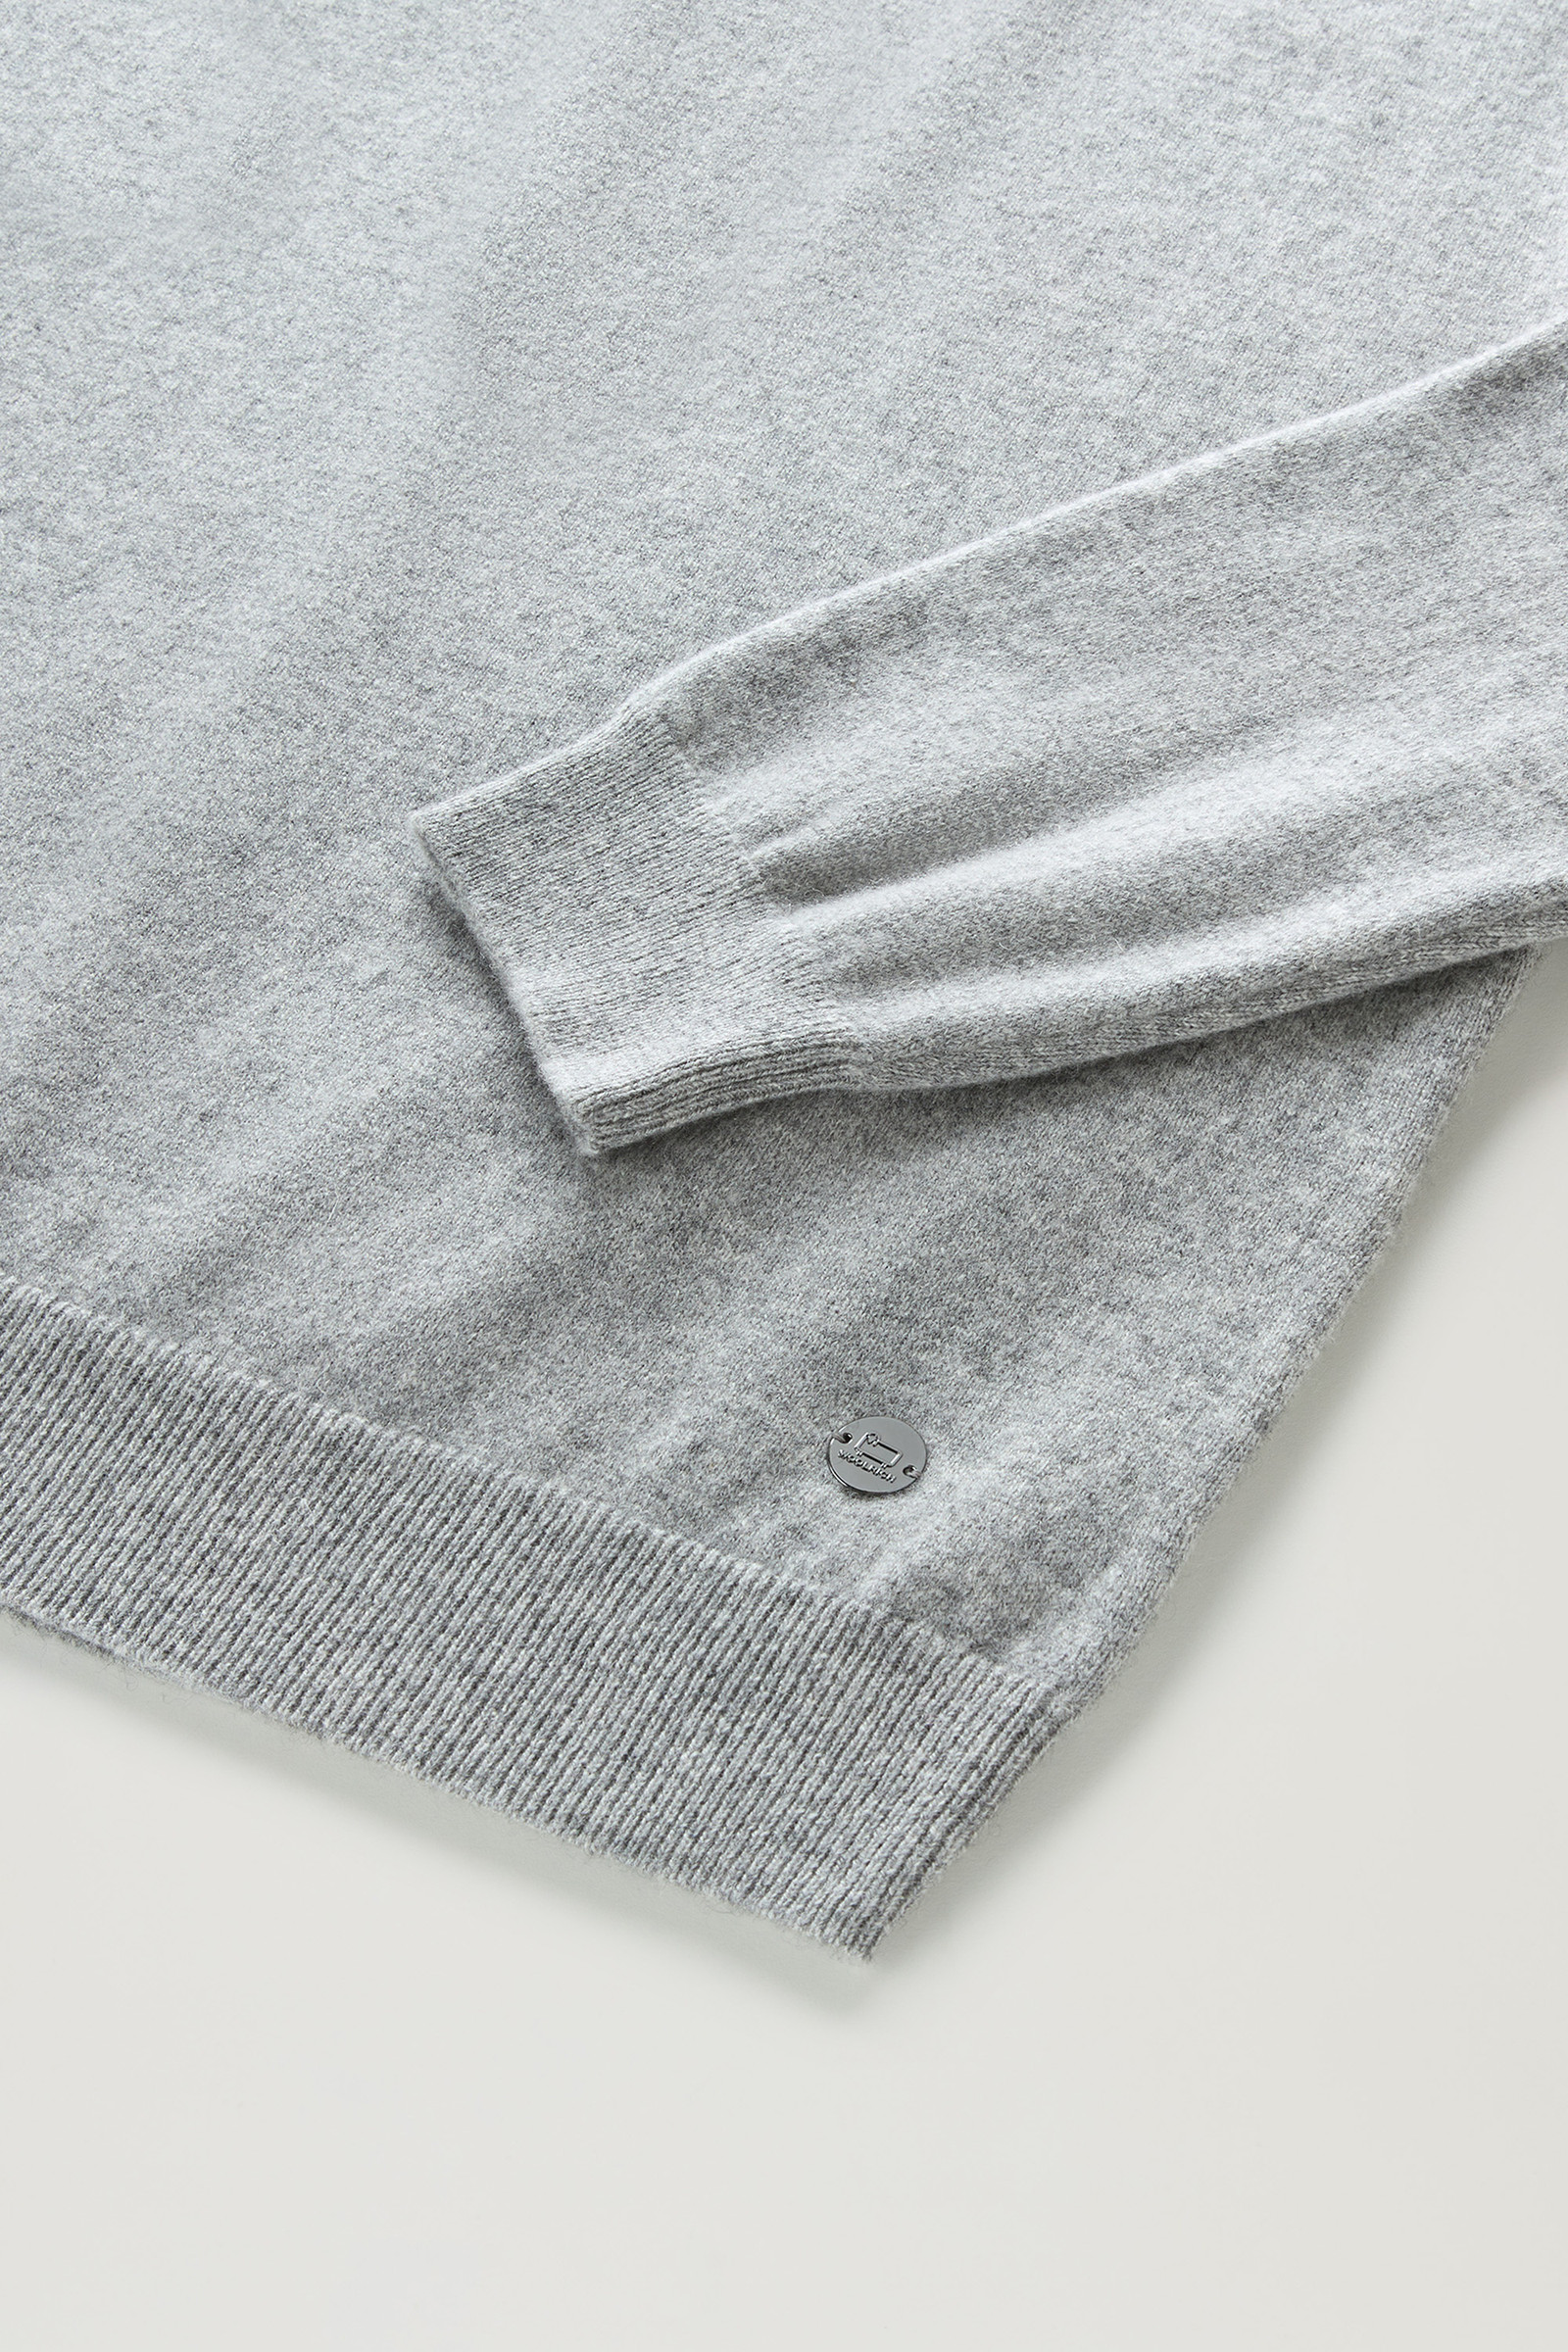 Men's Luxe Crewneck Sweater in Pure Cashmere Grey | Woolrich USA